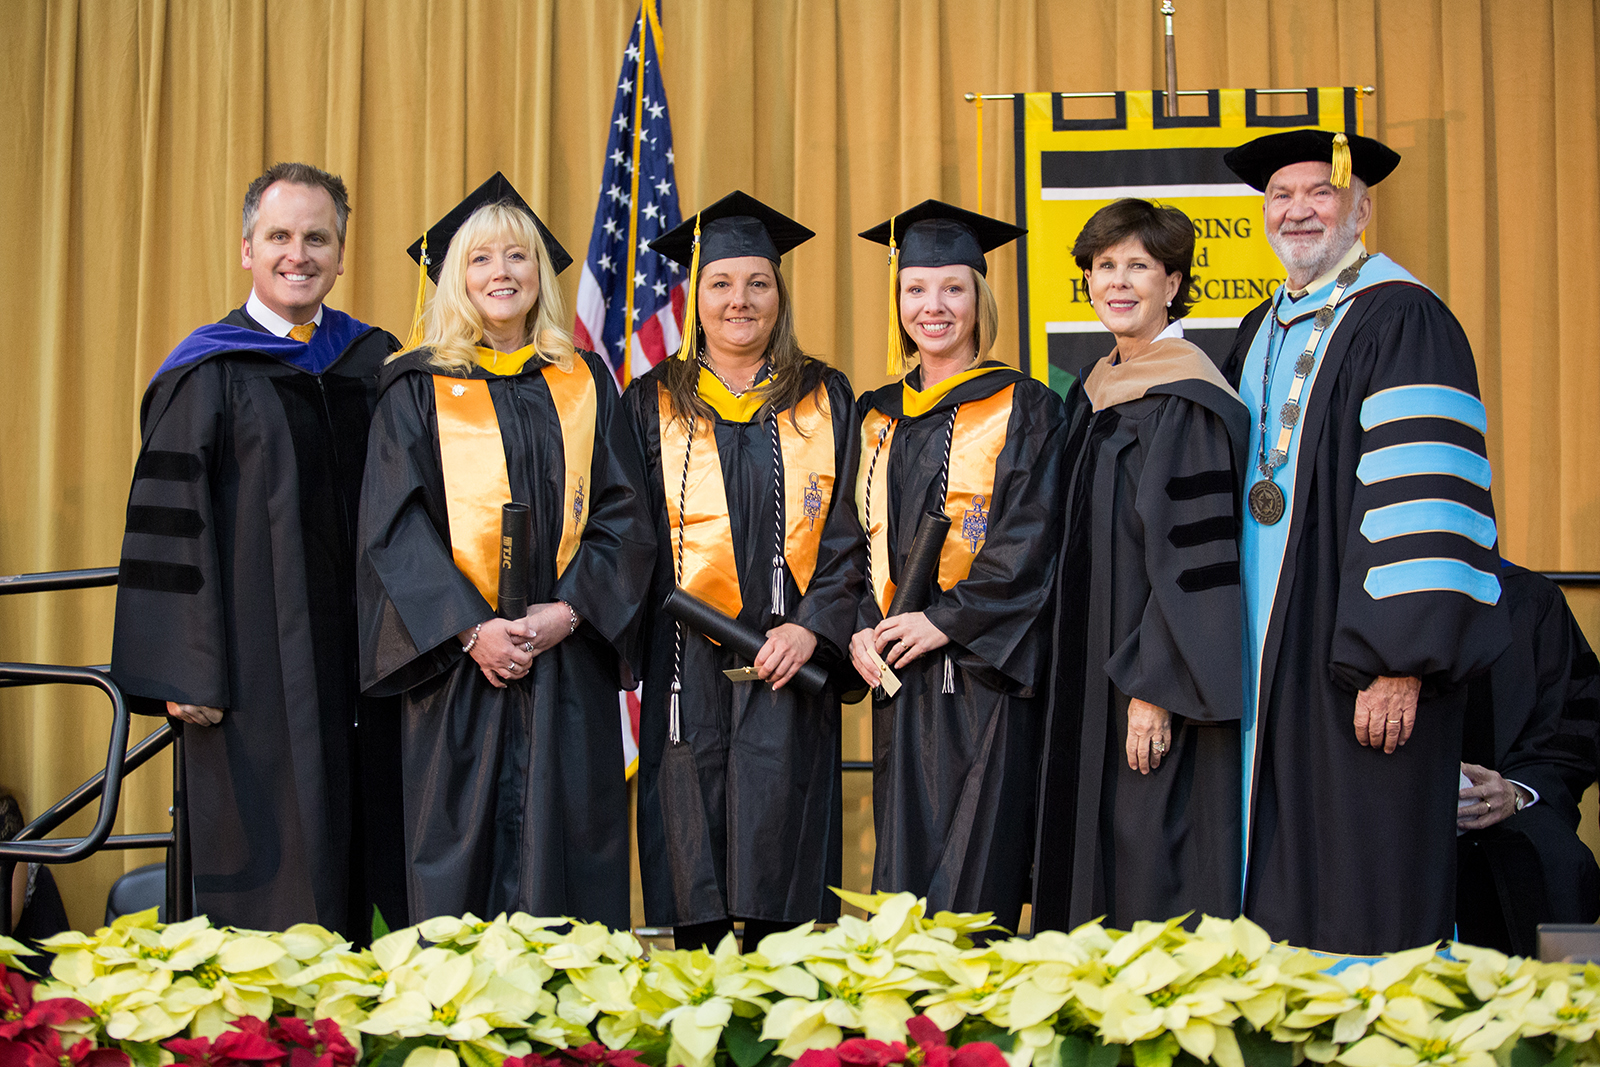 Tyler Junior College made history on Dec. 8, 2017 after pursuing course scheduling best practices. The system awarded its first-ever Bachelor of Science degrees during its fall commencement ceremony. From left: Texas State Sen. Bryan Hughes, commencement speaker and 1989 TJC alumnus; Bachelor of Science degree recipients Michelle Trammell of Tyler, Shannon Kassaw of Palestine, and Amanda Camp of Lufkin; then-TJC Board President Ann W. Brookshire; and TJC Chancellor Dr. Mike Metke.